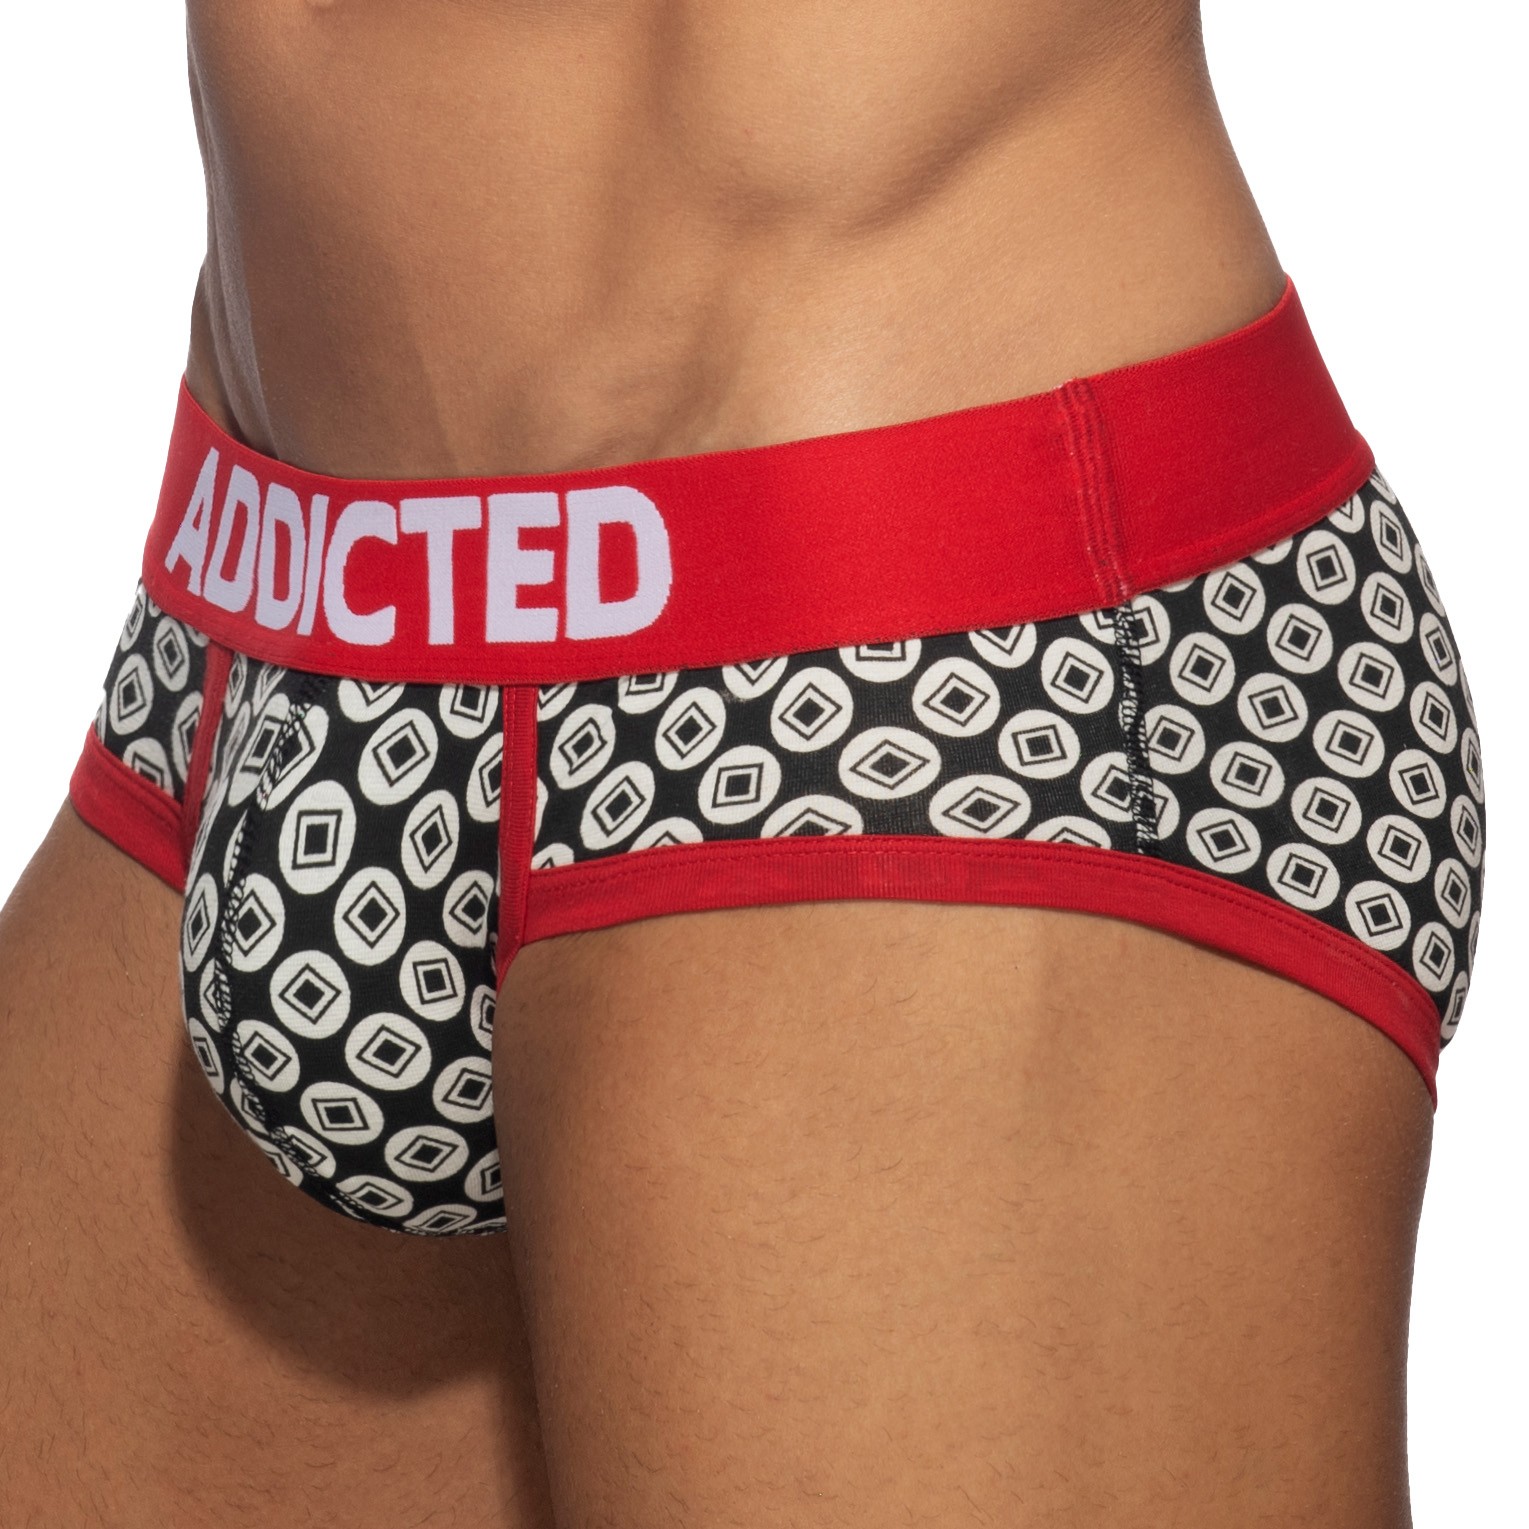 Geometric brief - black: Briefs for man brand ADDICTED for sale onl